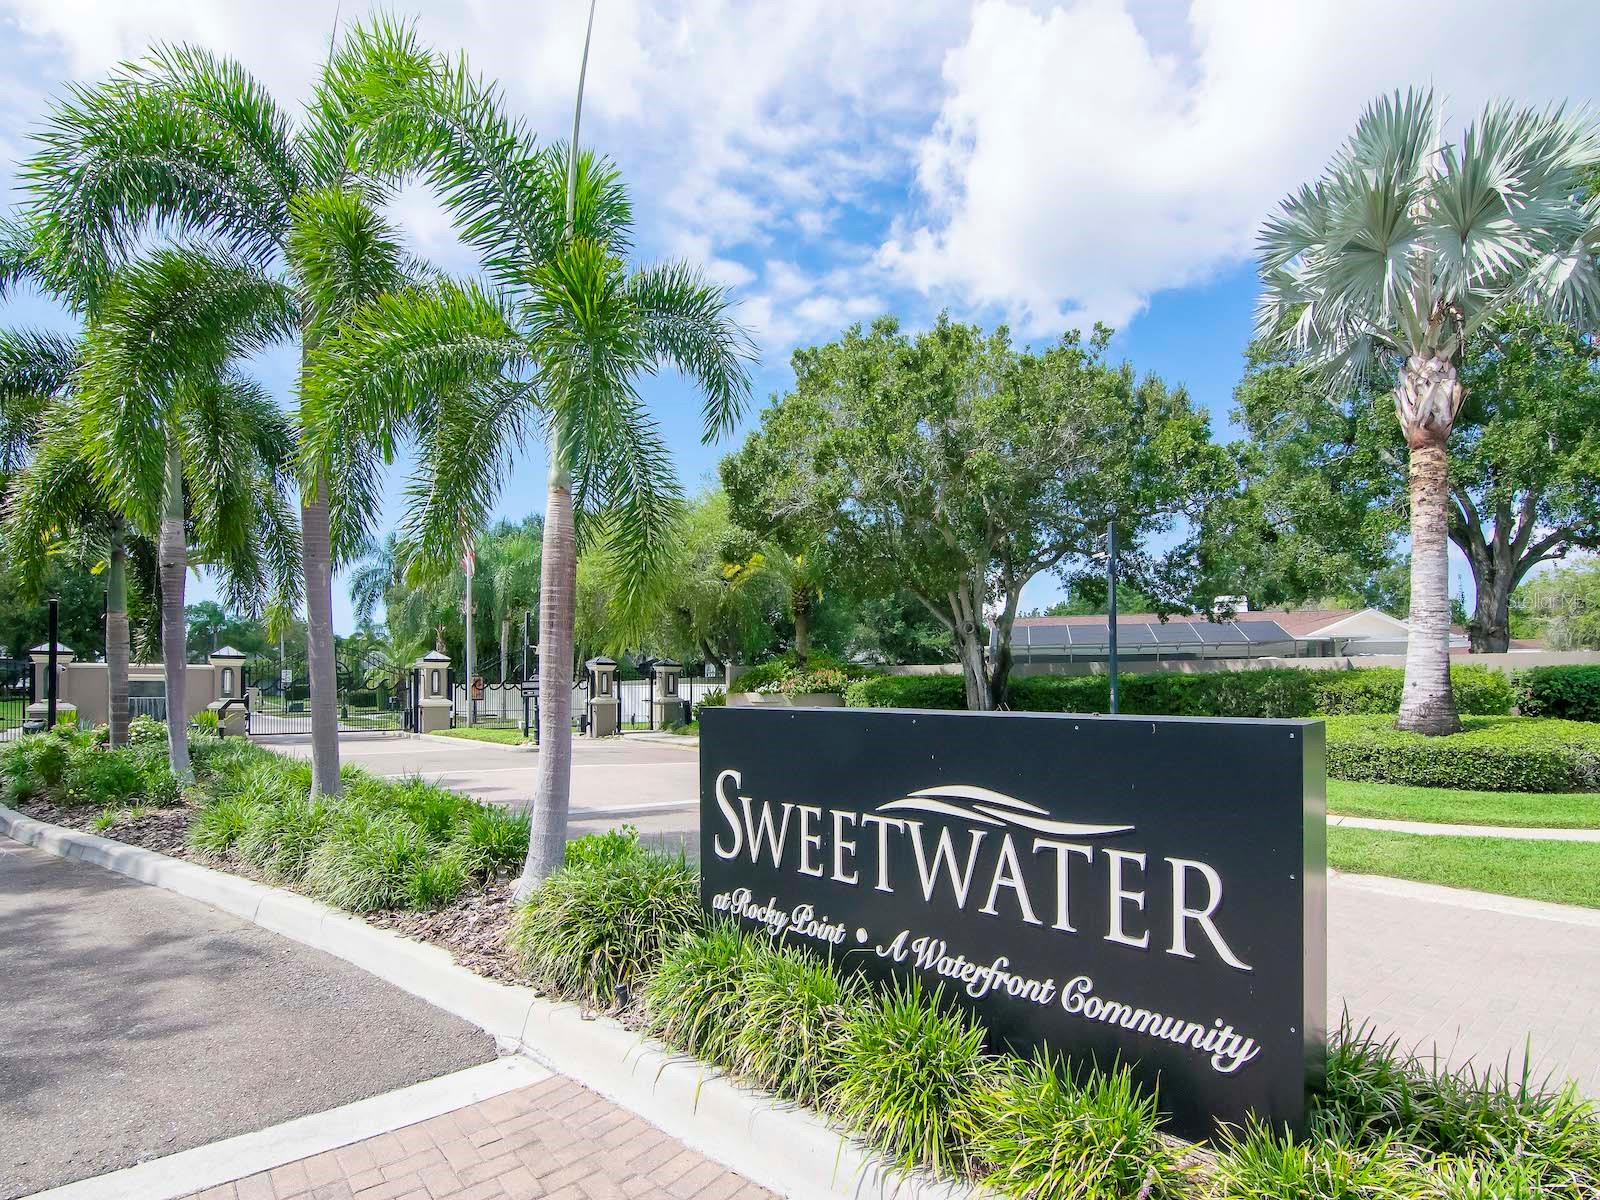 Sweetwater A Premier Gated Waterfront Community